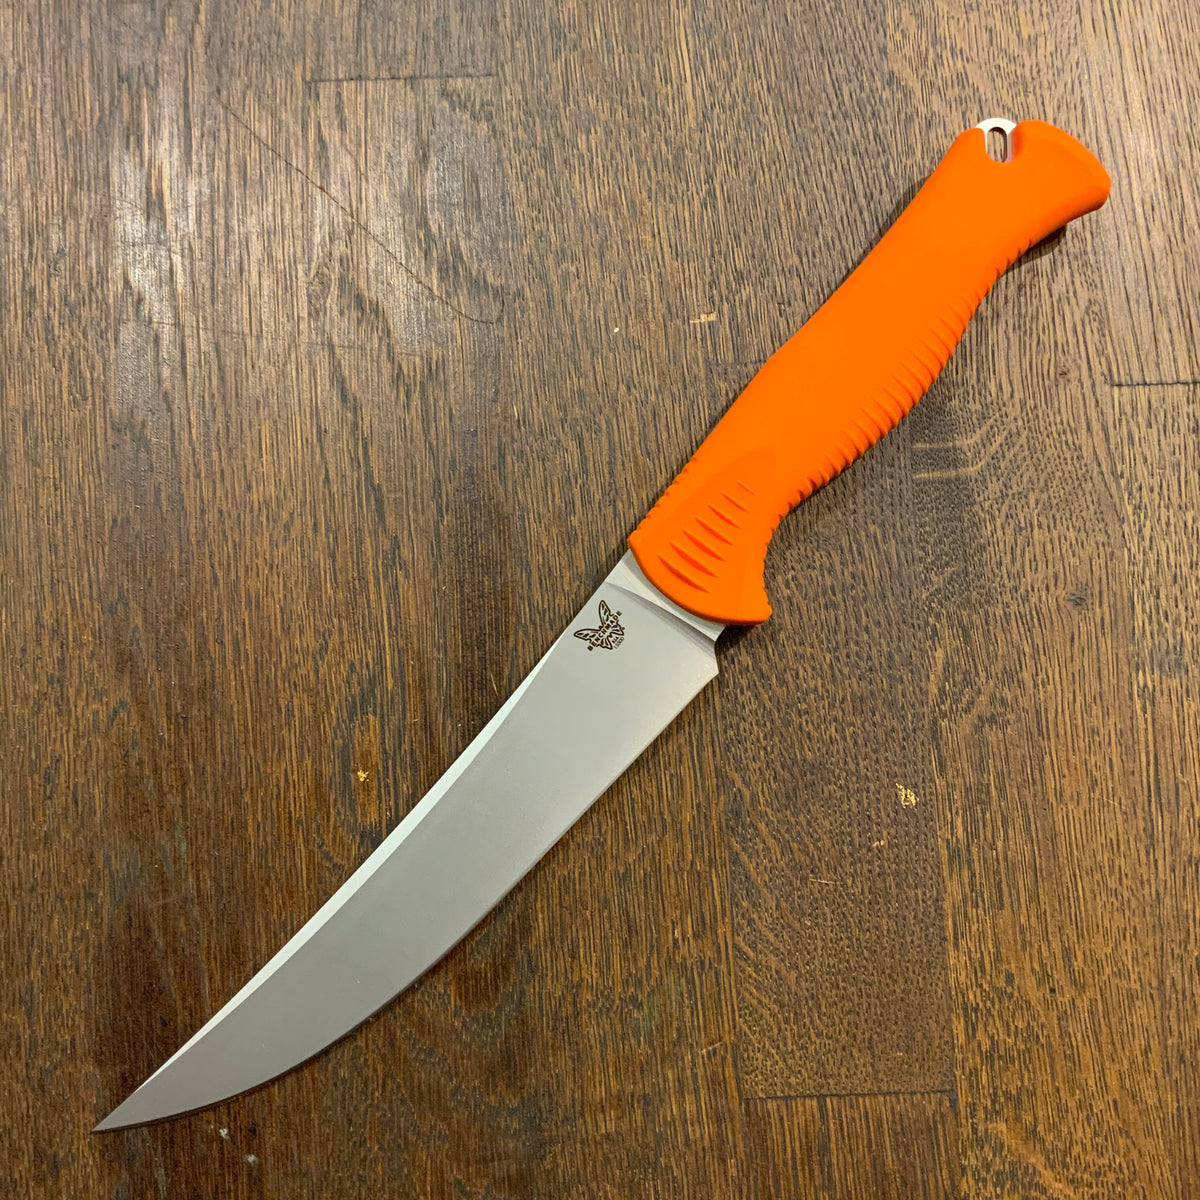 Benchmade 15500 Meatcrafter 6" Trailing Point CPM-154 Fixed Blade Orange Santoprene Handle with Sheath